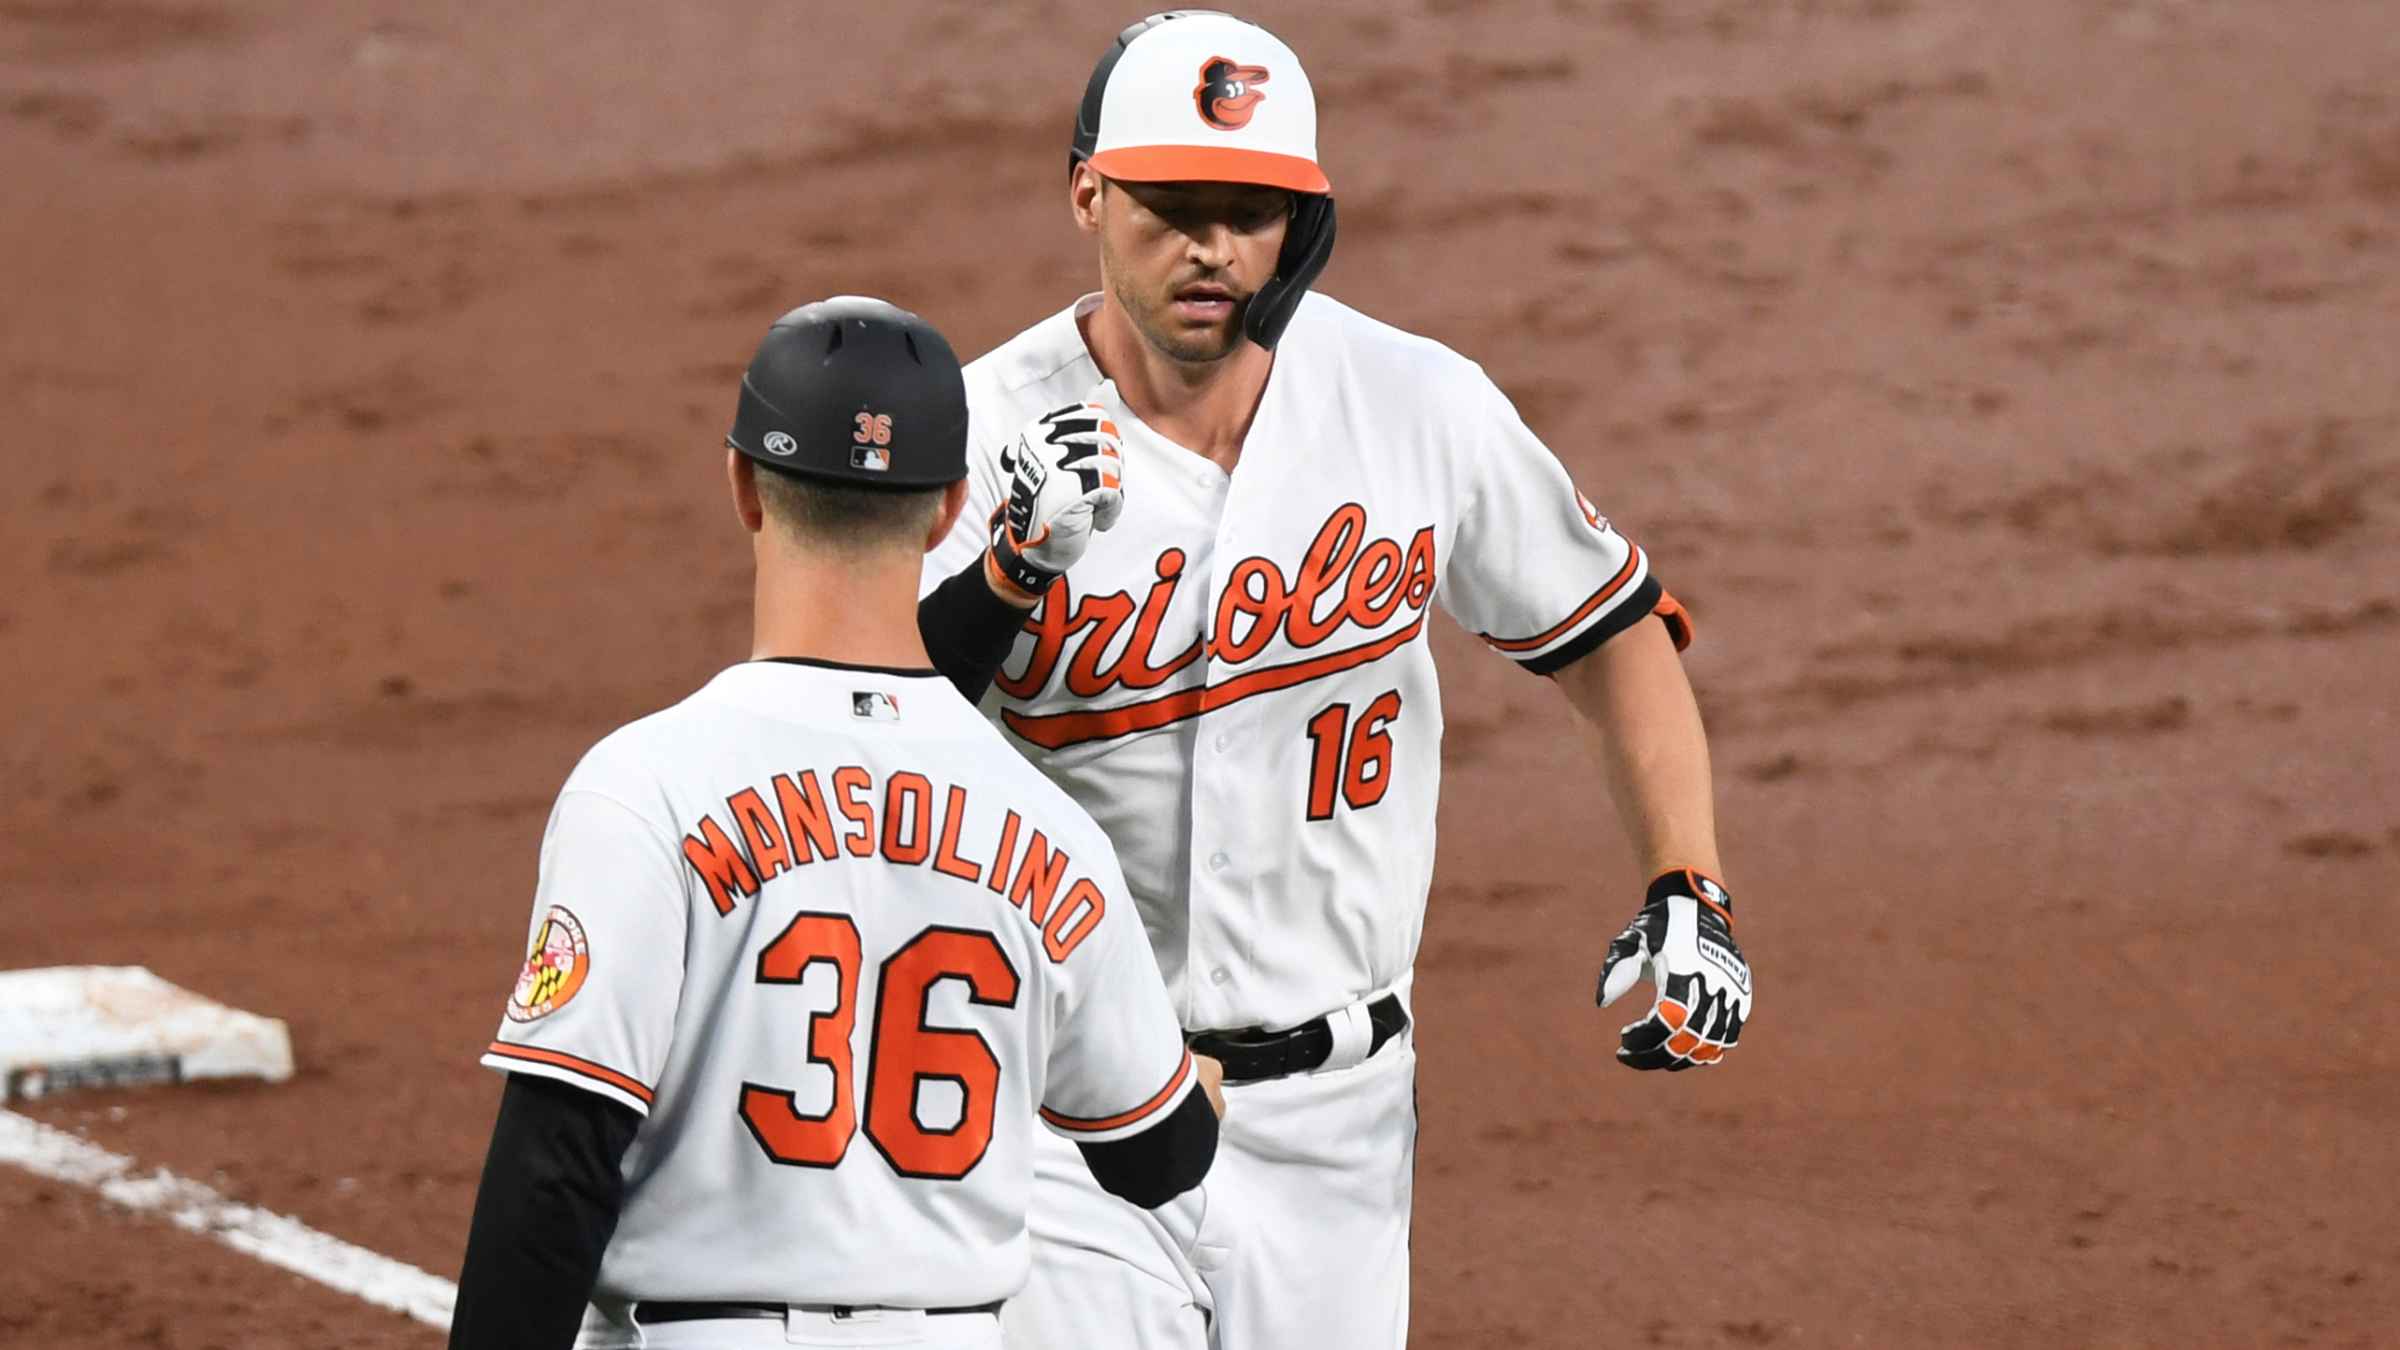 Trey Mancini after emotional win: This is home to me 